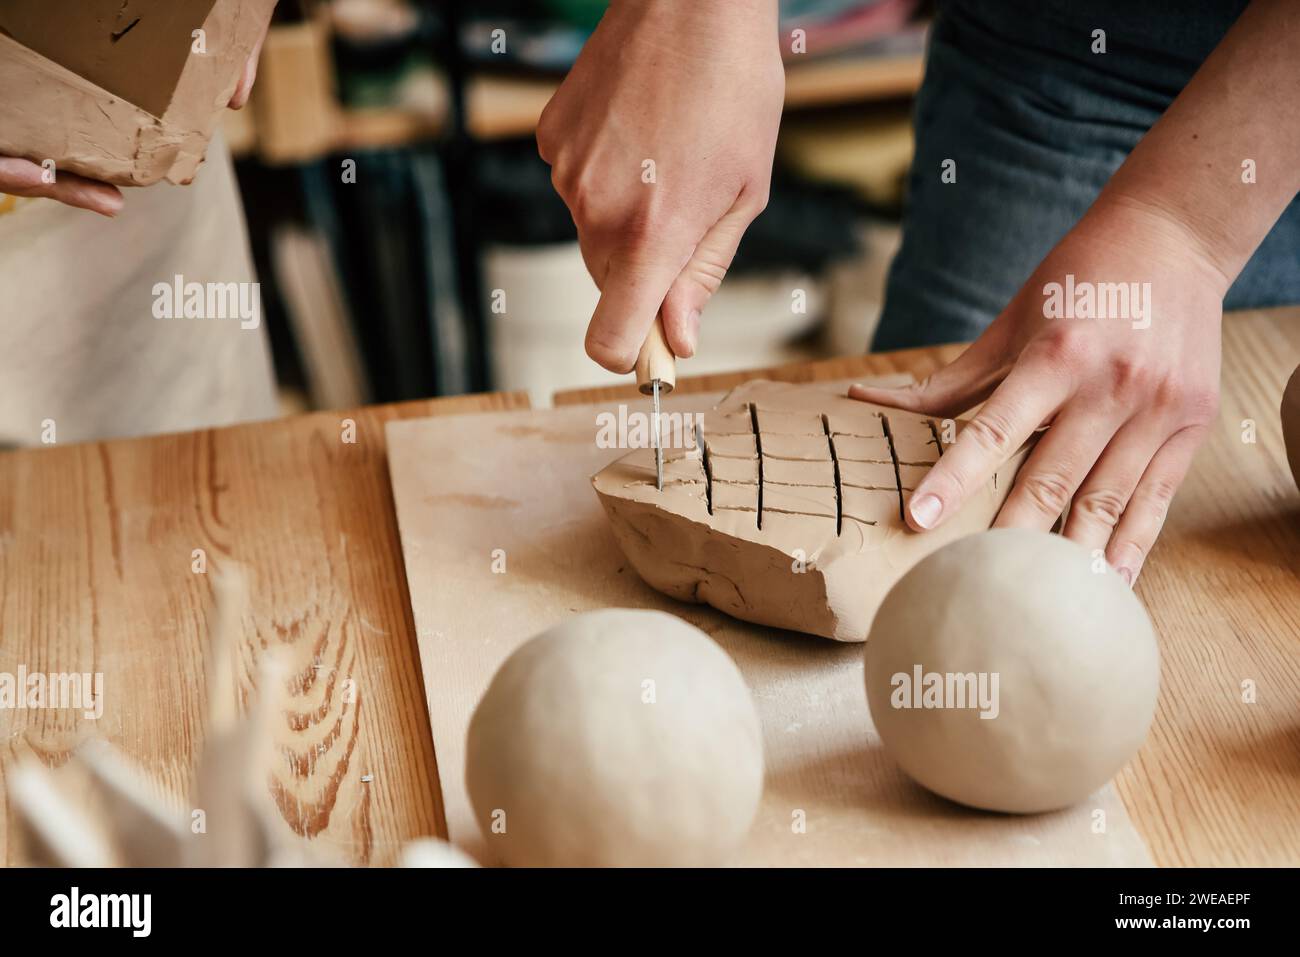 Potter cuts piece of clay with knife to soften it. Stock Photo